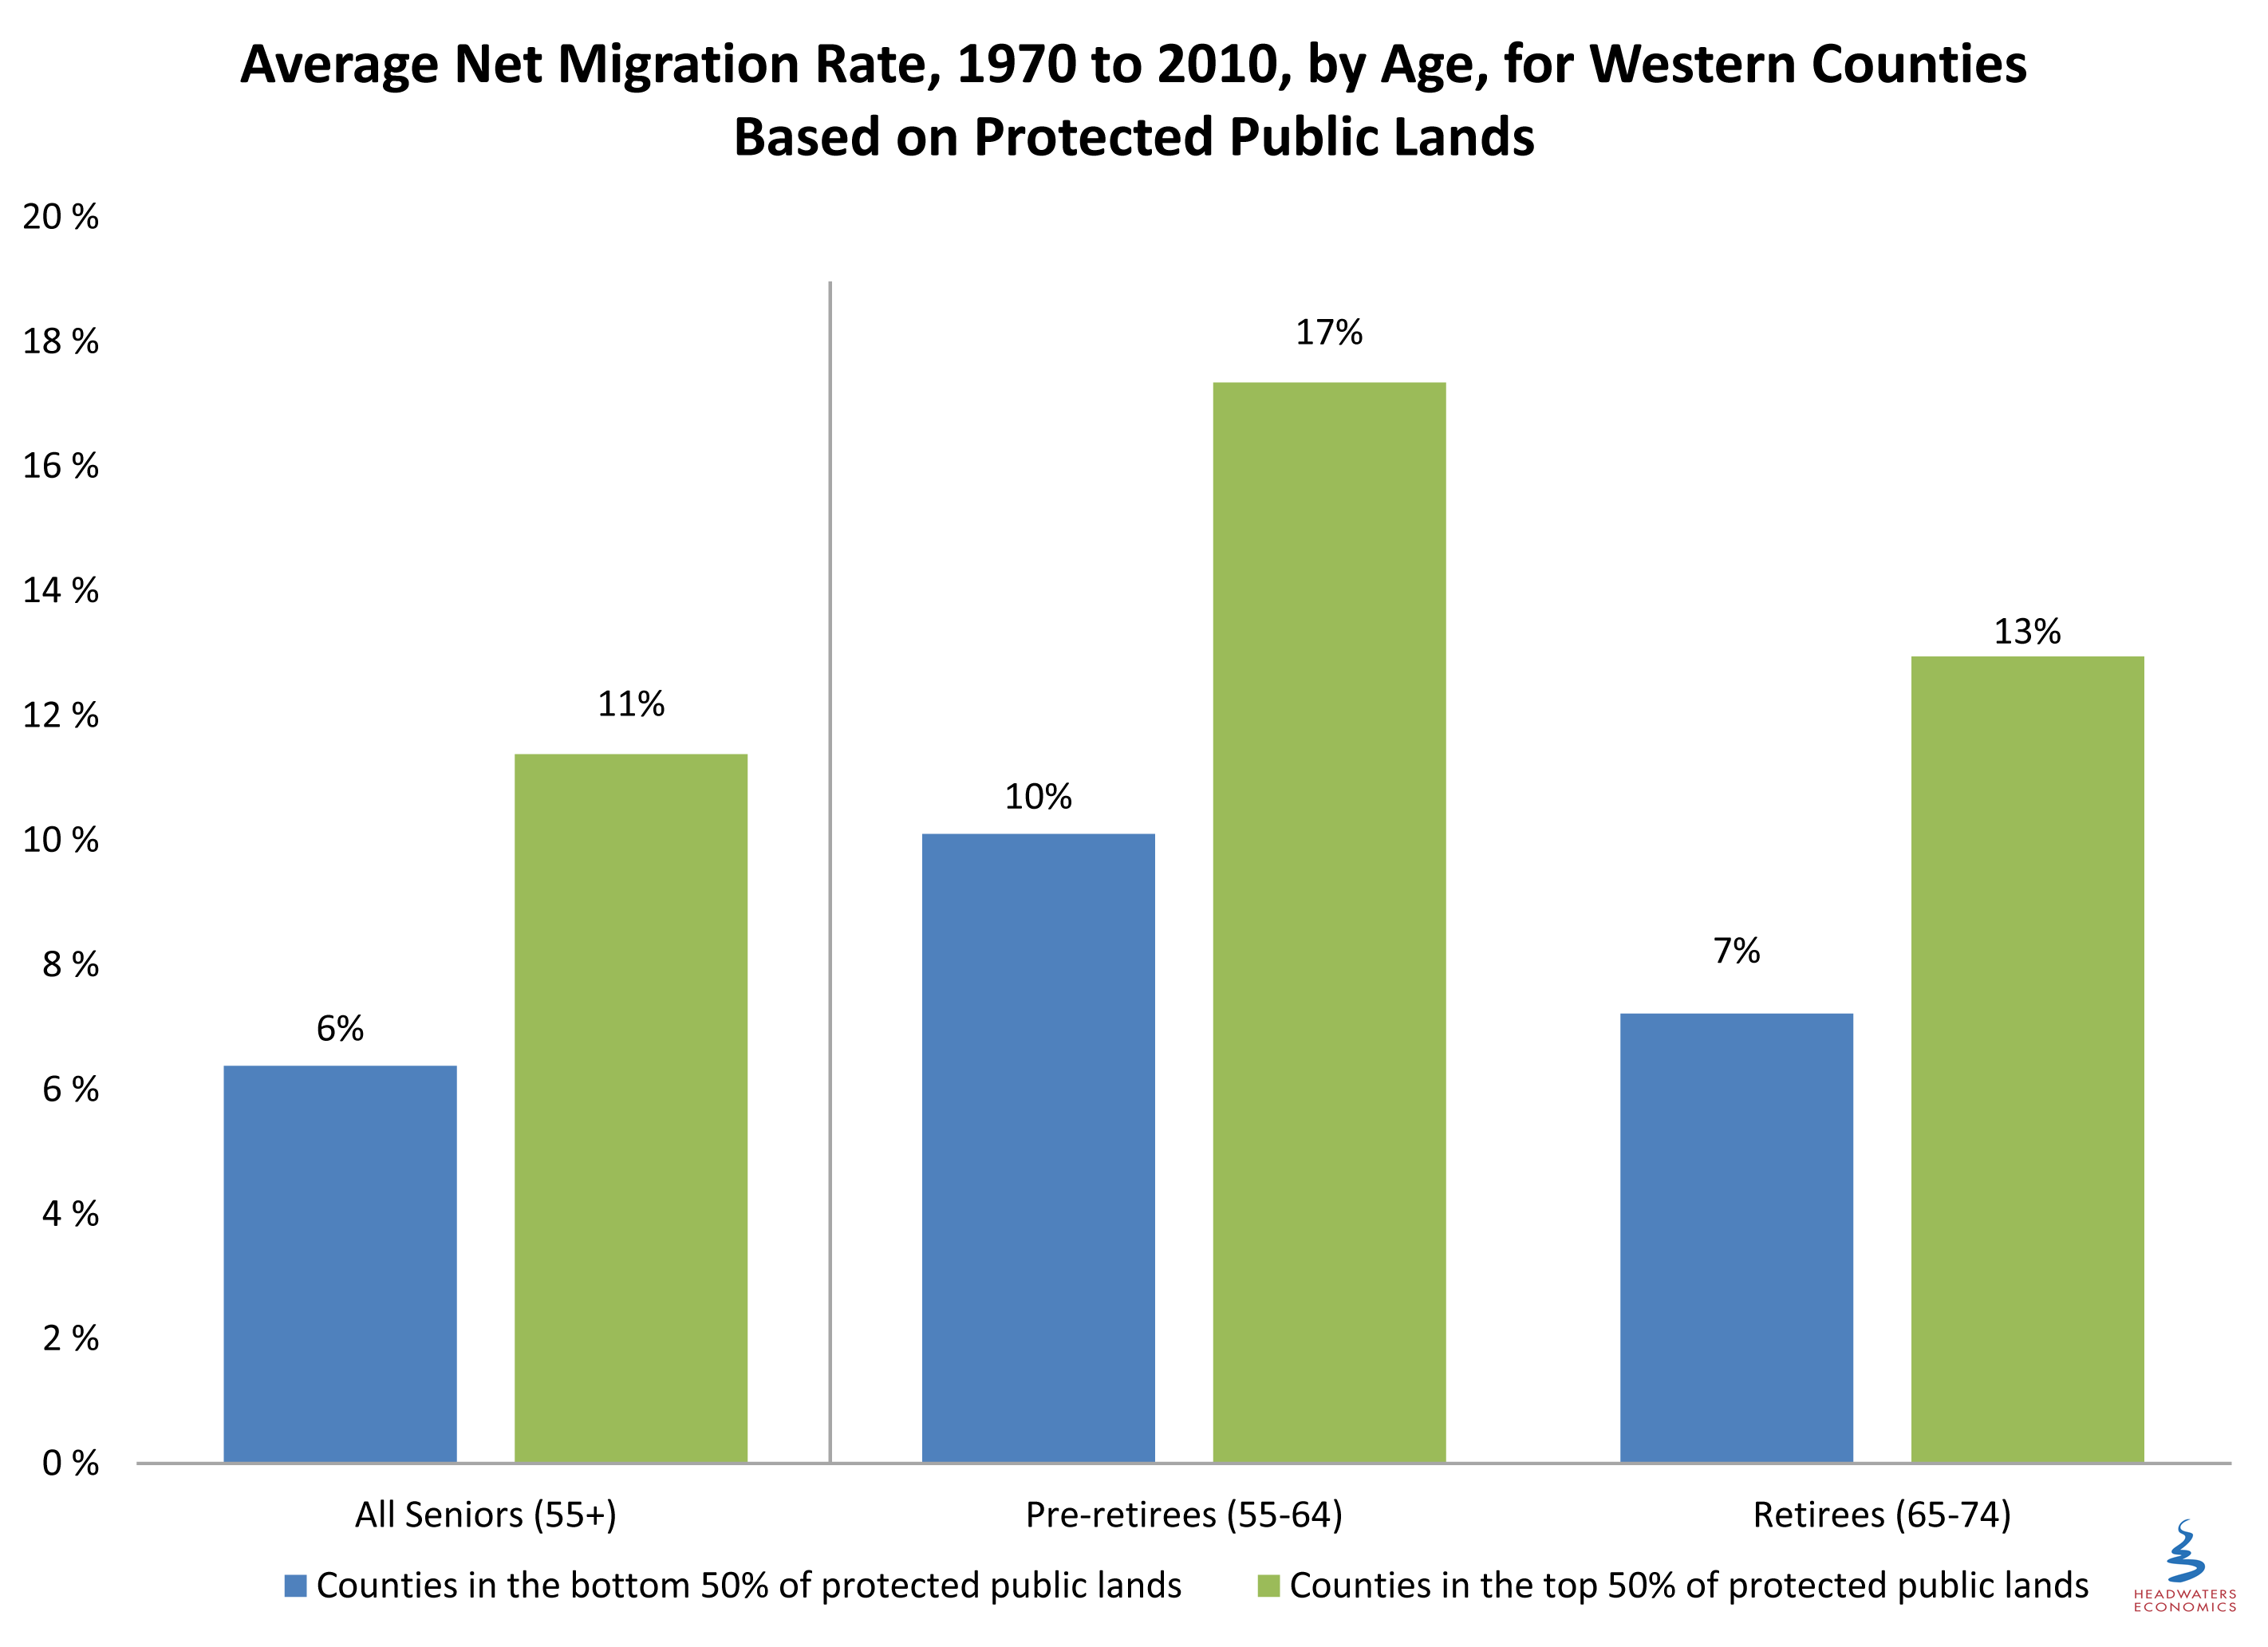 Retiree Migration and Protected Public Lands